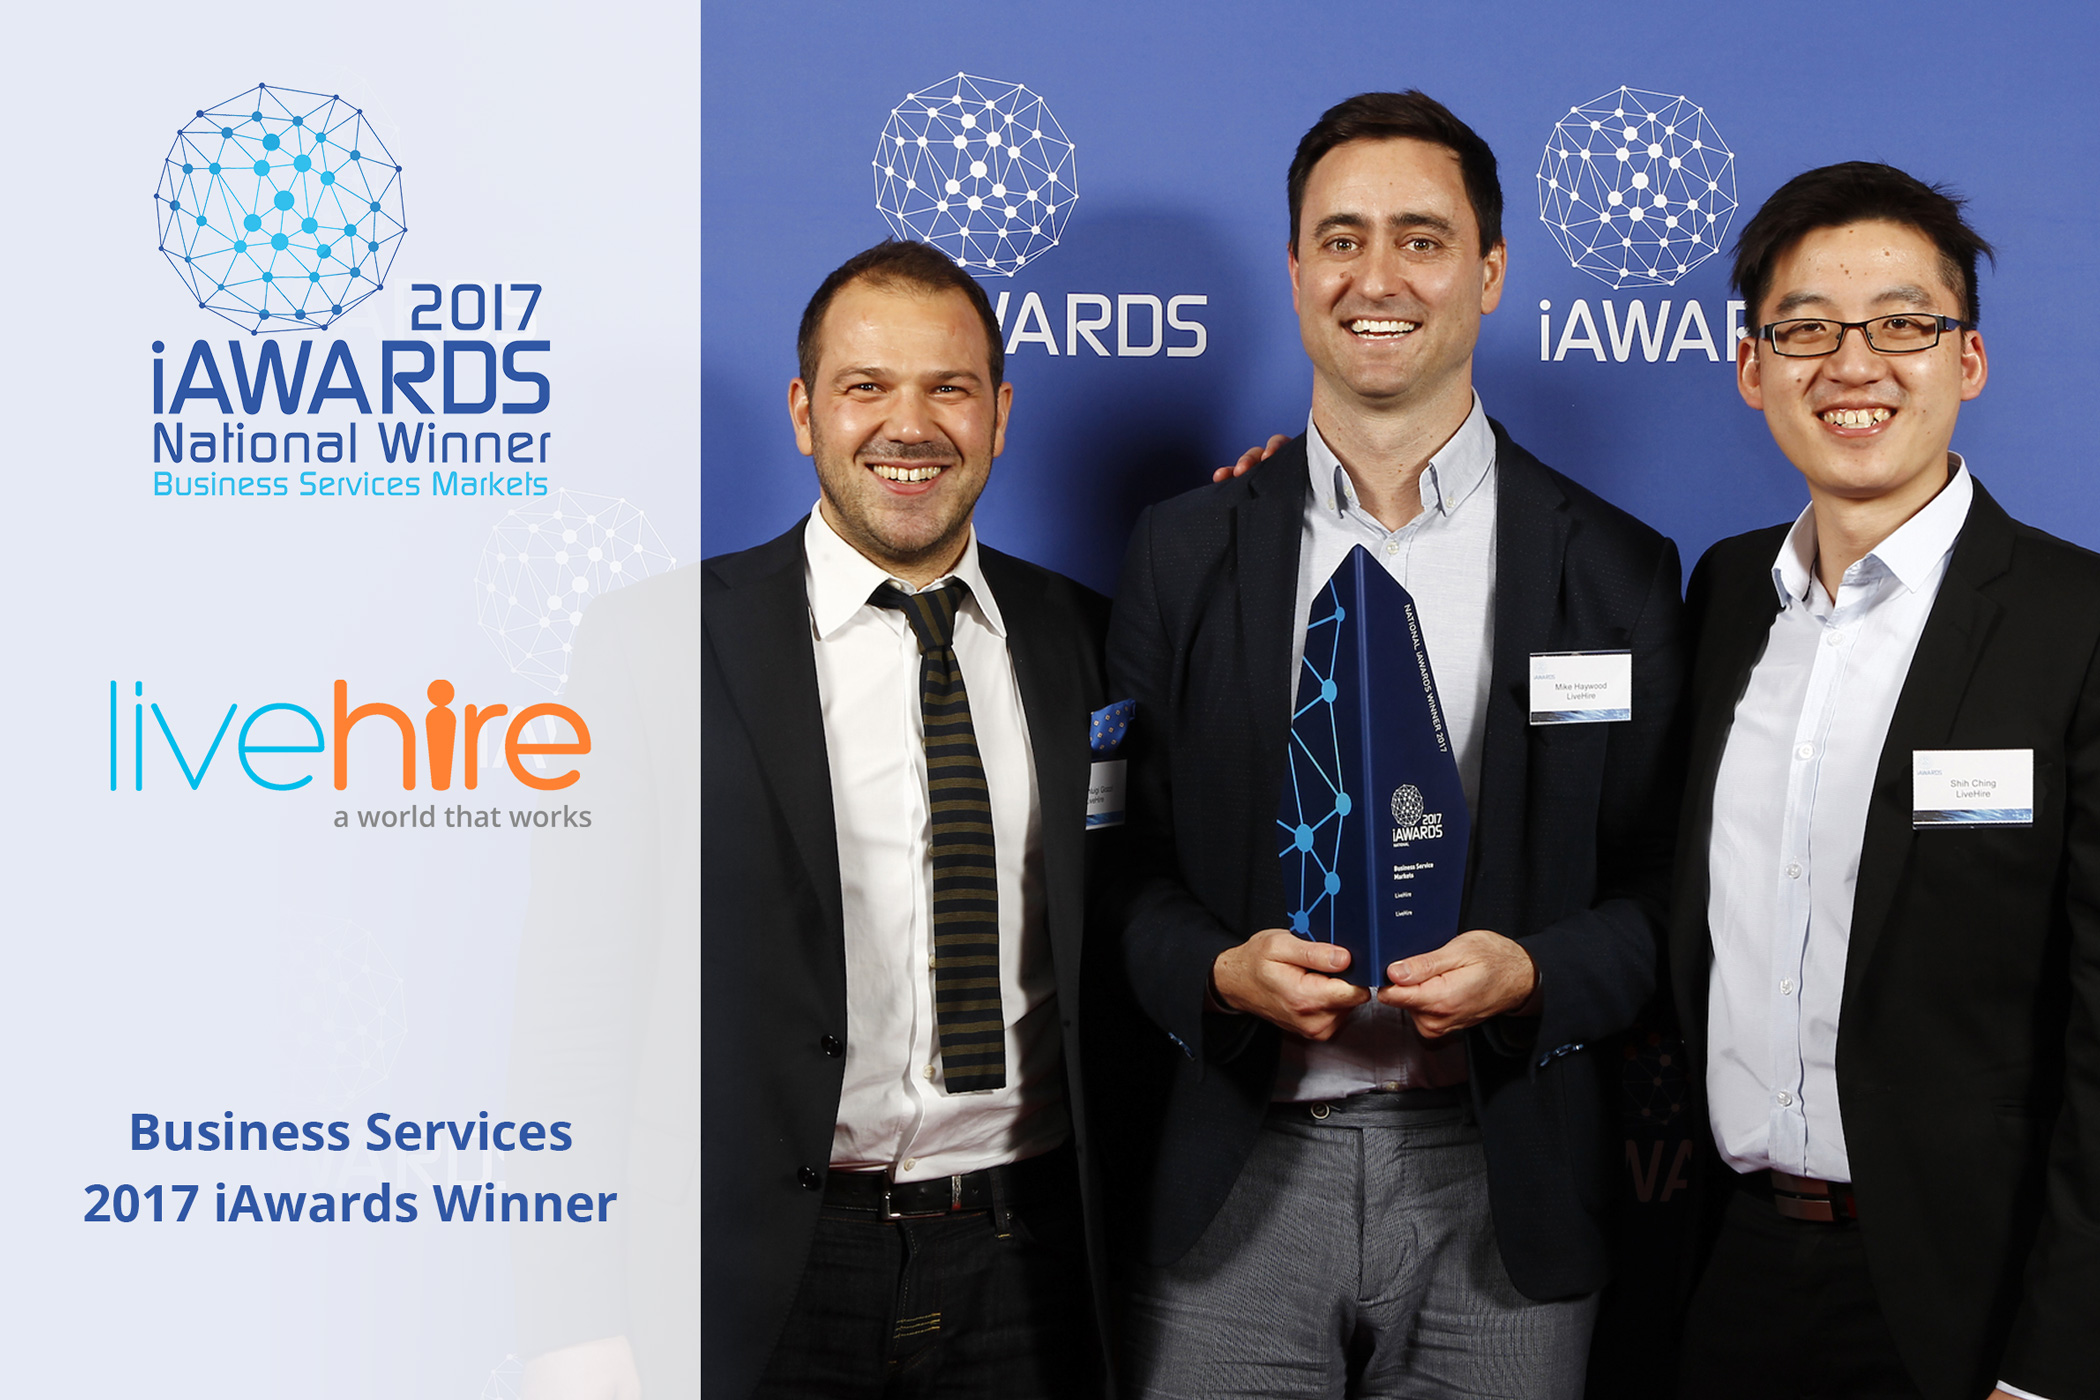 LiveHire wins National Award for Business Services @ 2017 iAwards.